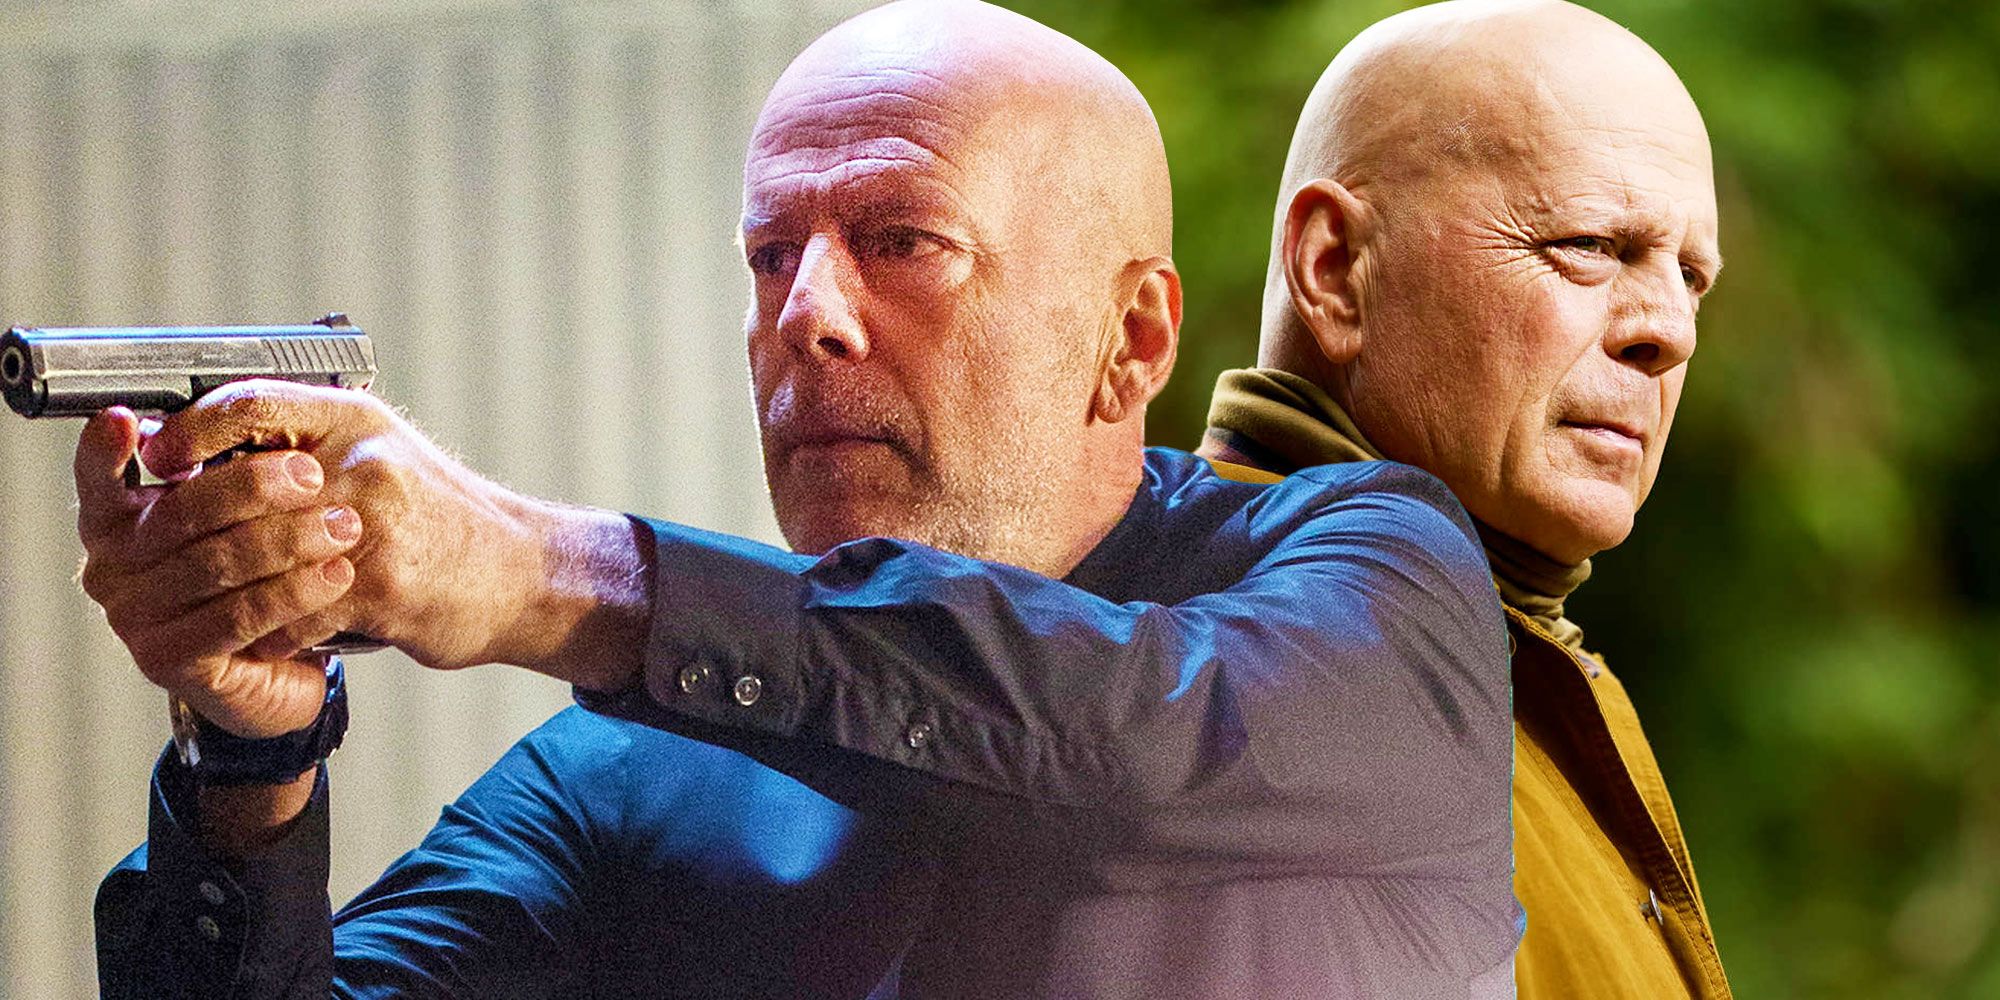 Bruce Willis' OnSet Struggles In Recent Years Detailed By Coworkers